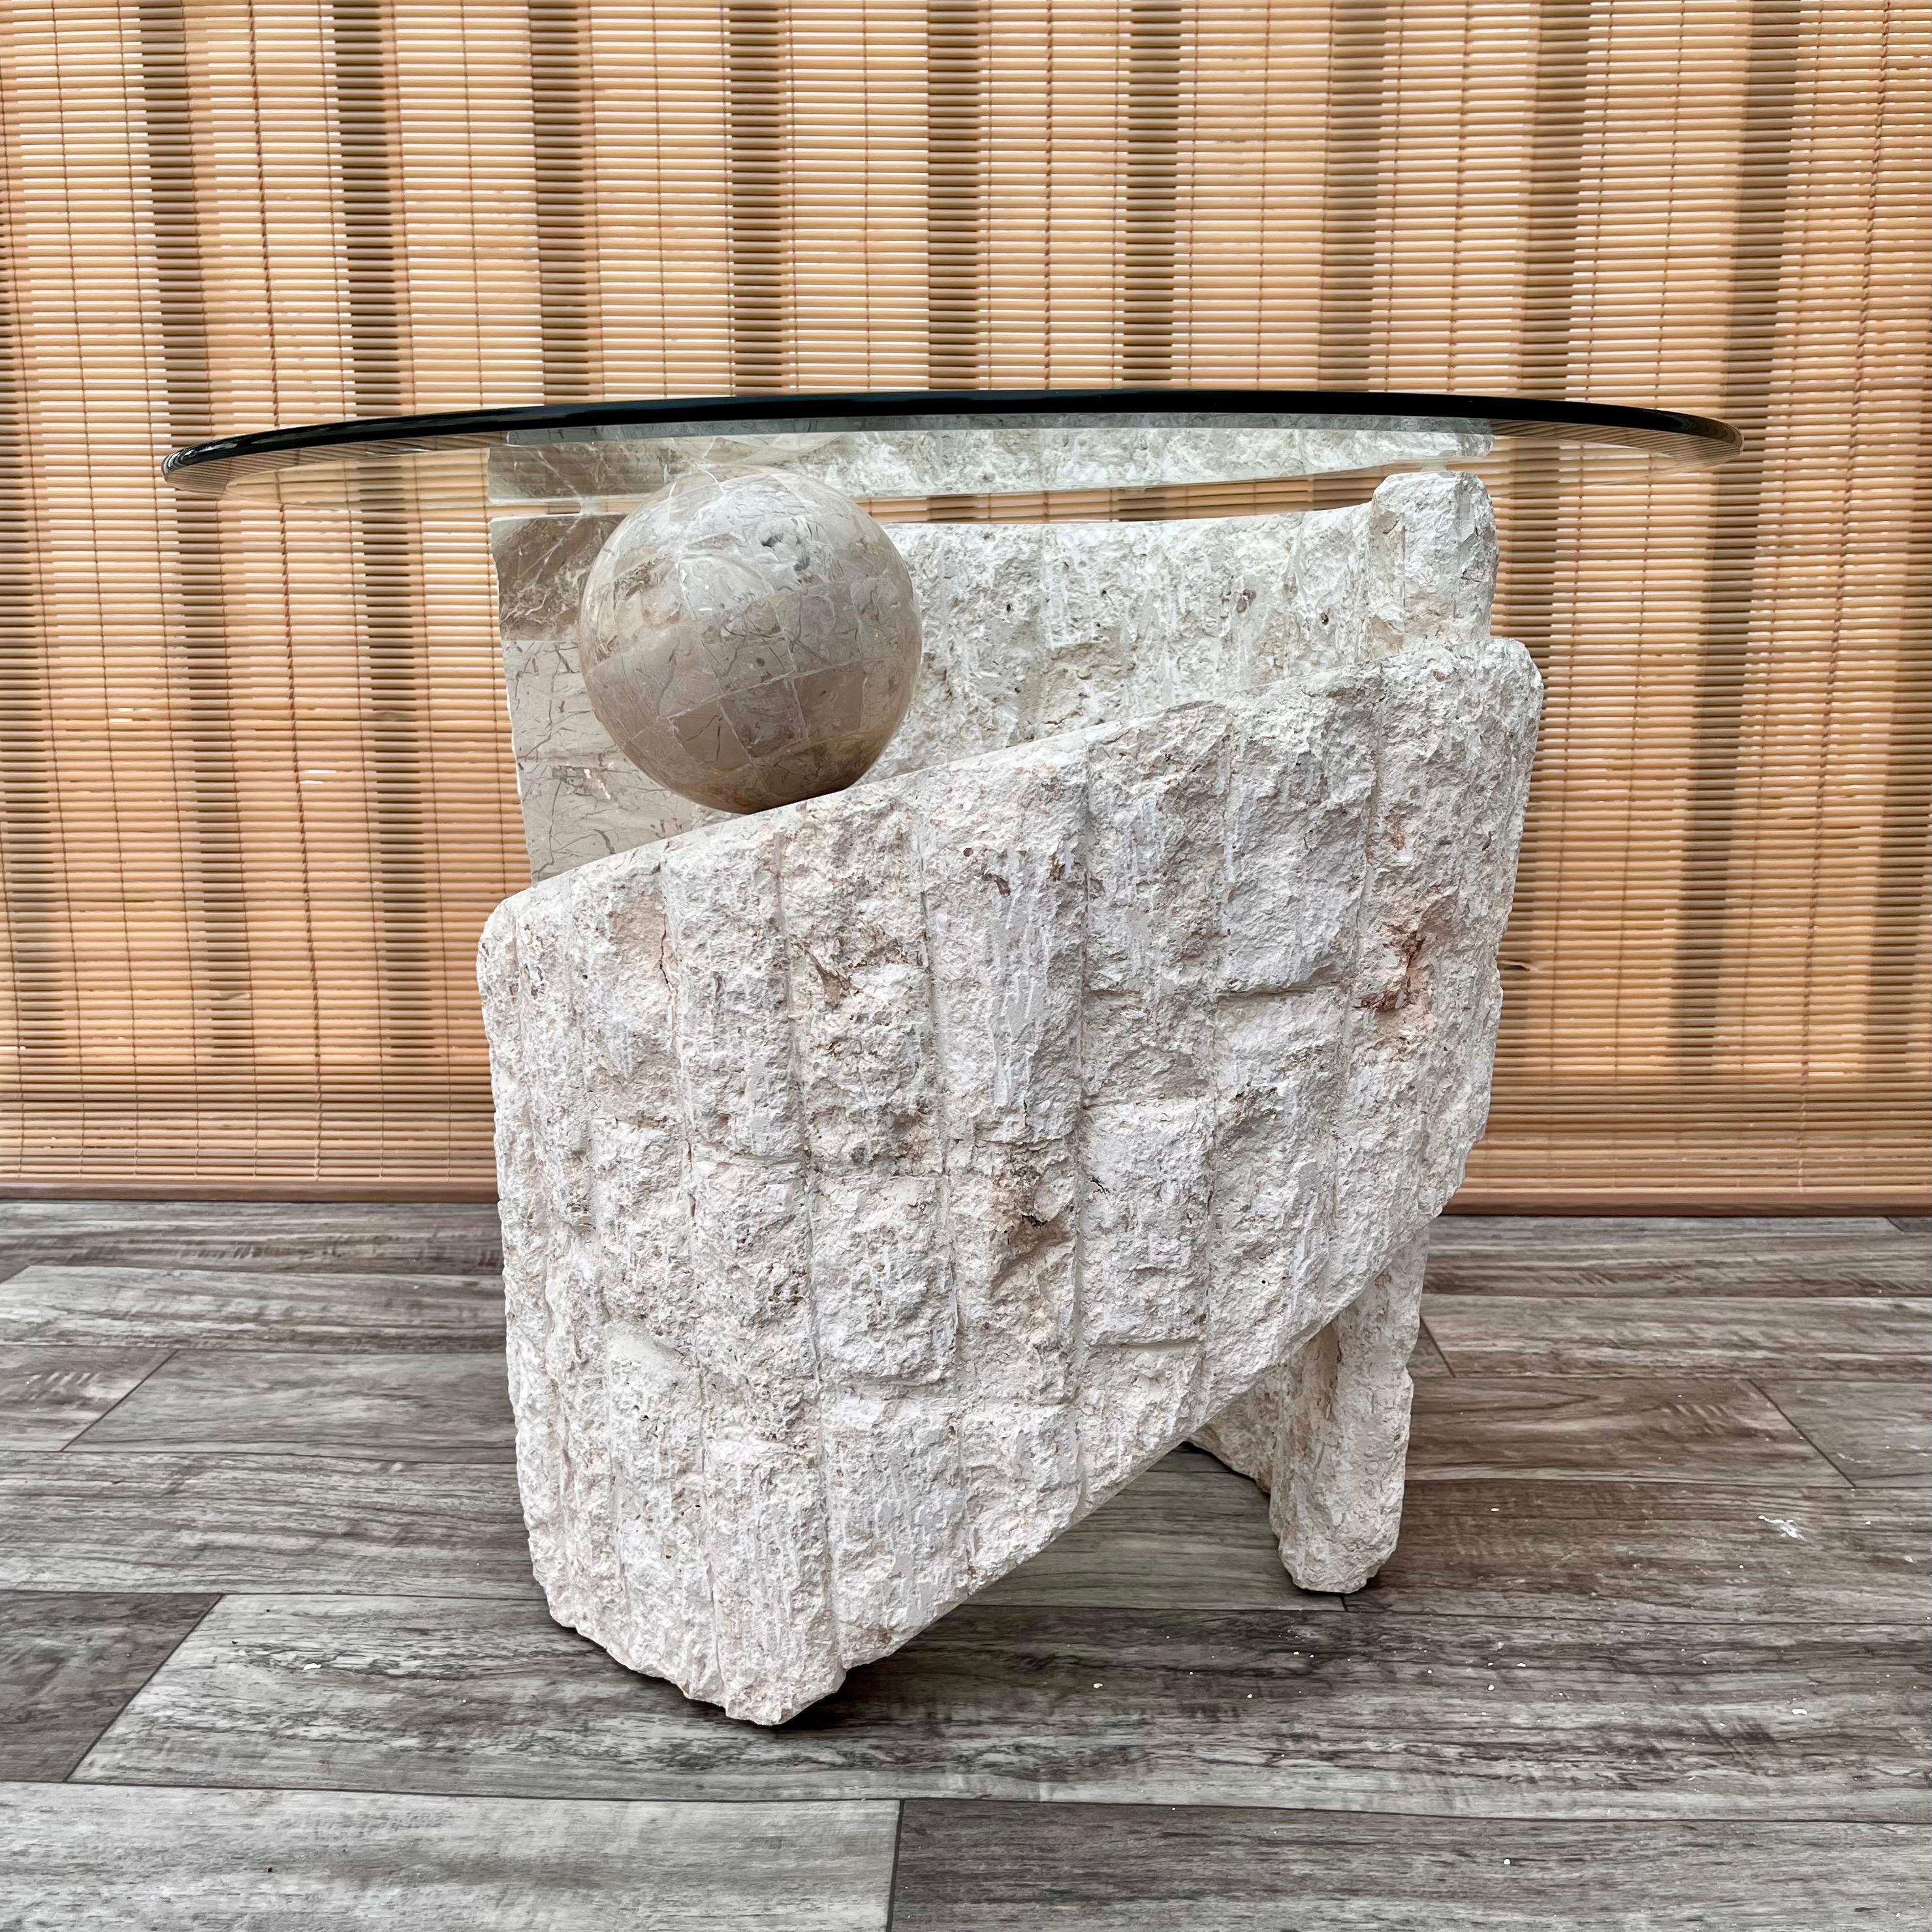 Vintage Postmodern sculptural natural mactan stone rounded accent / end table with glass top. Circa 1980s. 
Features a sculptural spiral pedestal with a contrasting combination of fractured and polished neutral color Mactan stone and topped with a